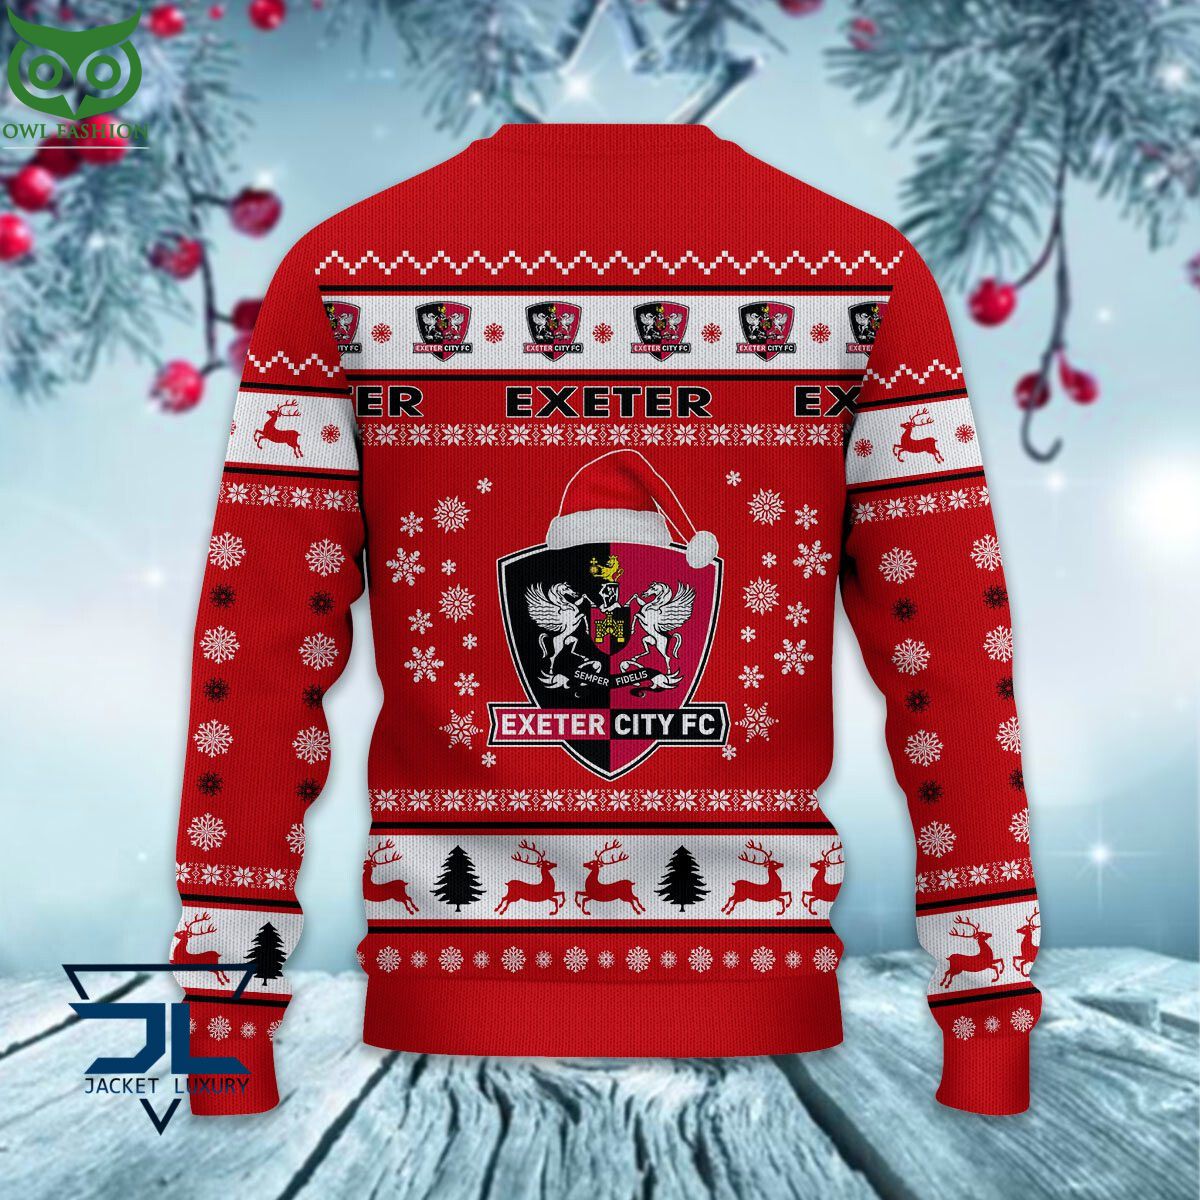 exeter city epl league cup ugly sweater 3 oxoU2.jpg